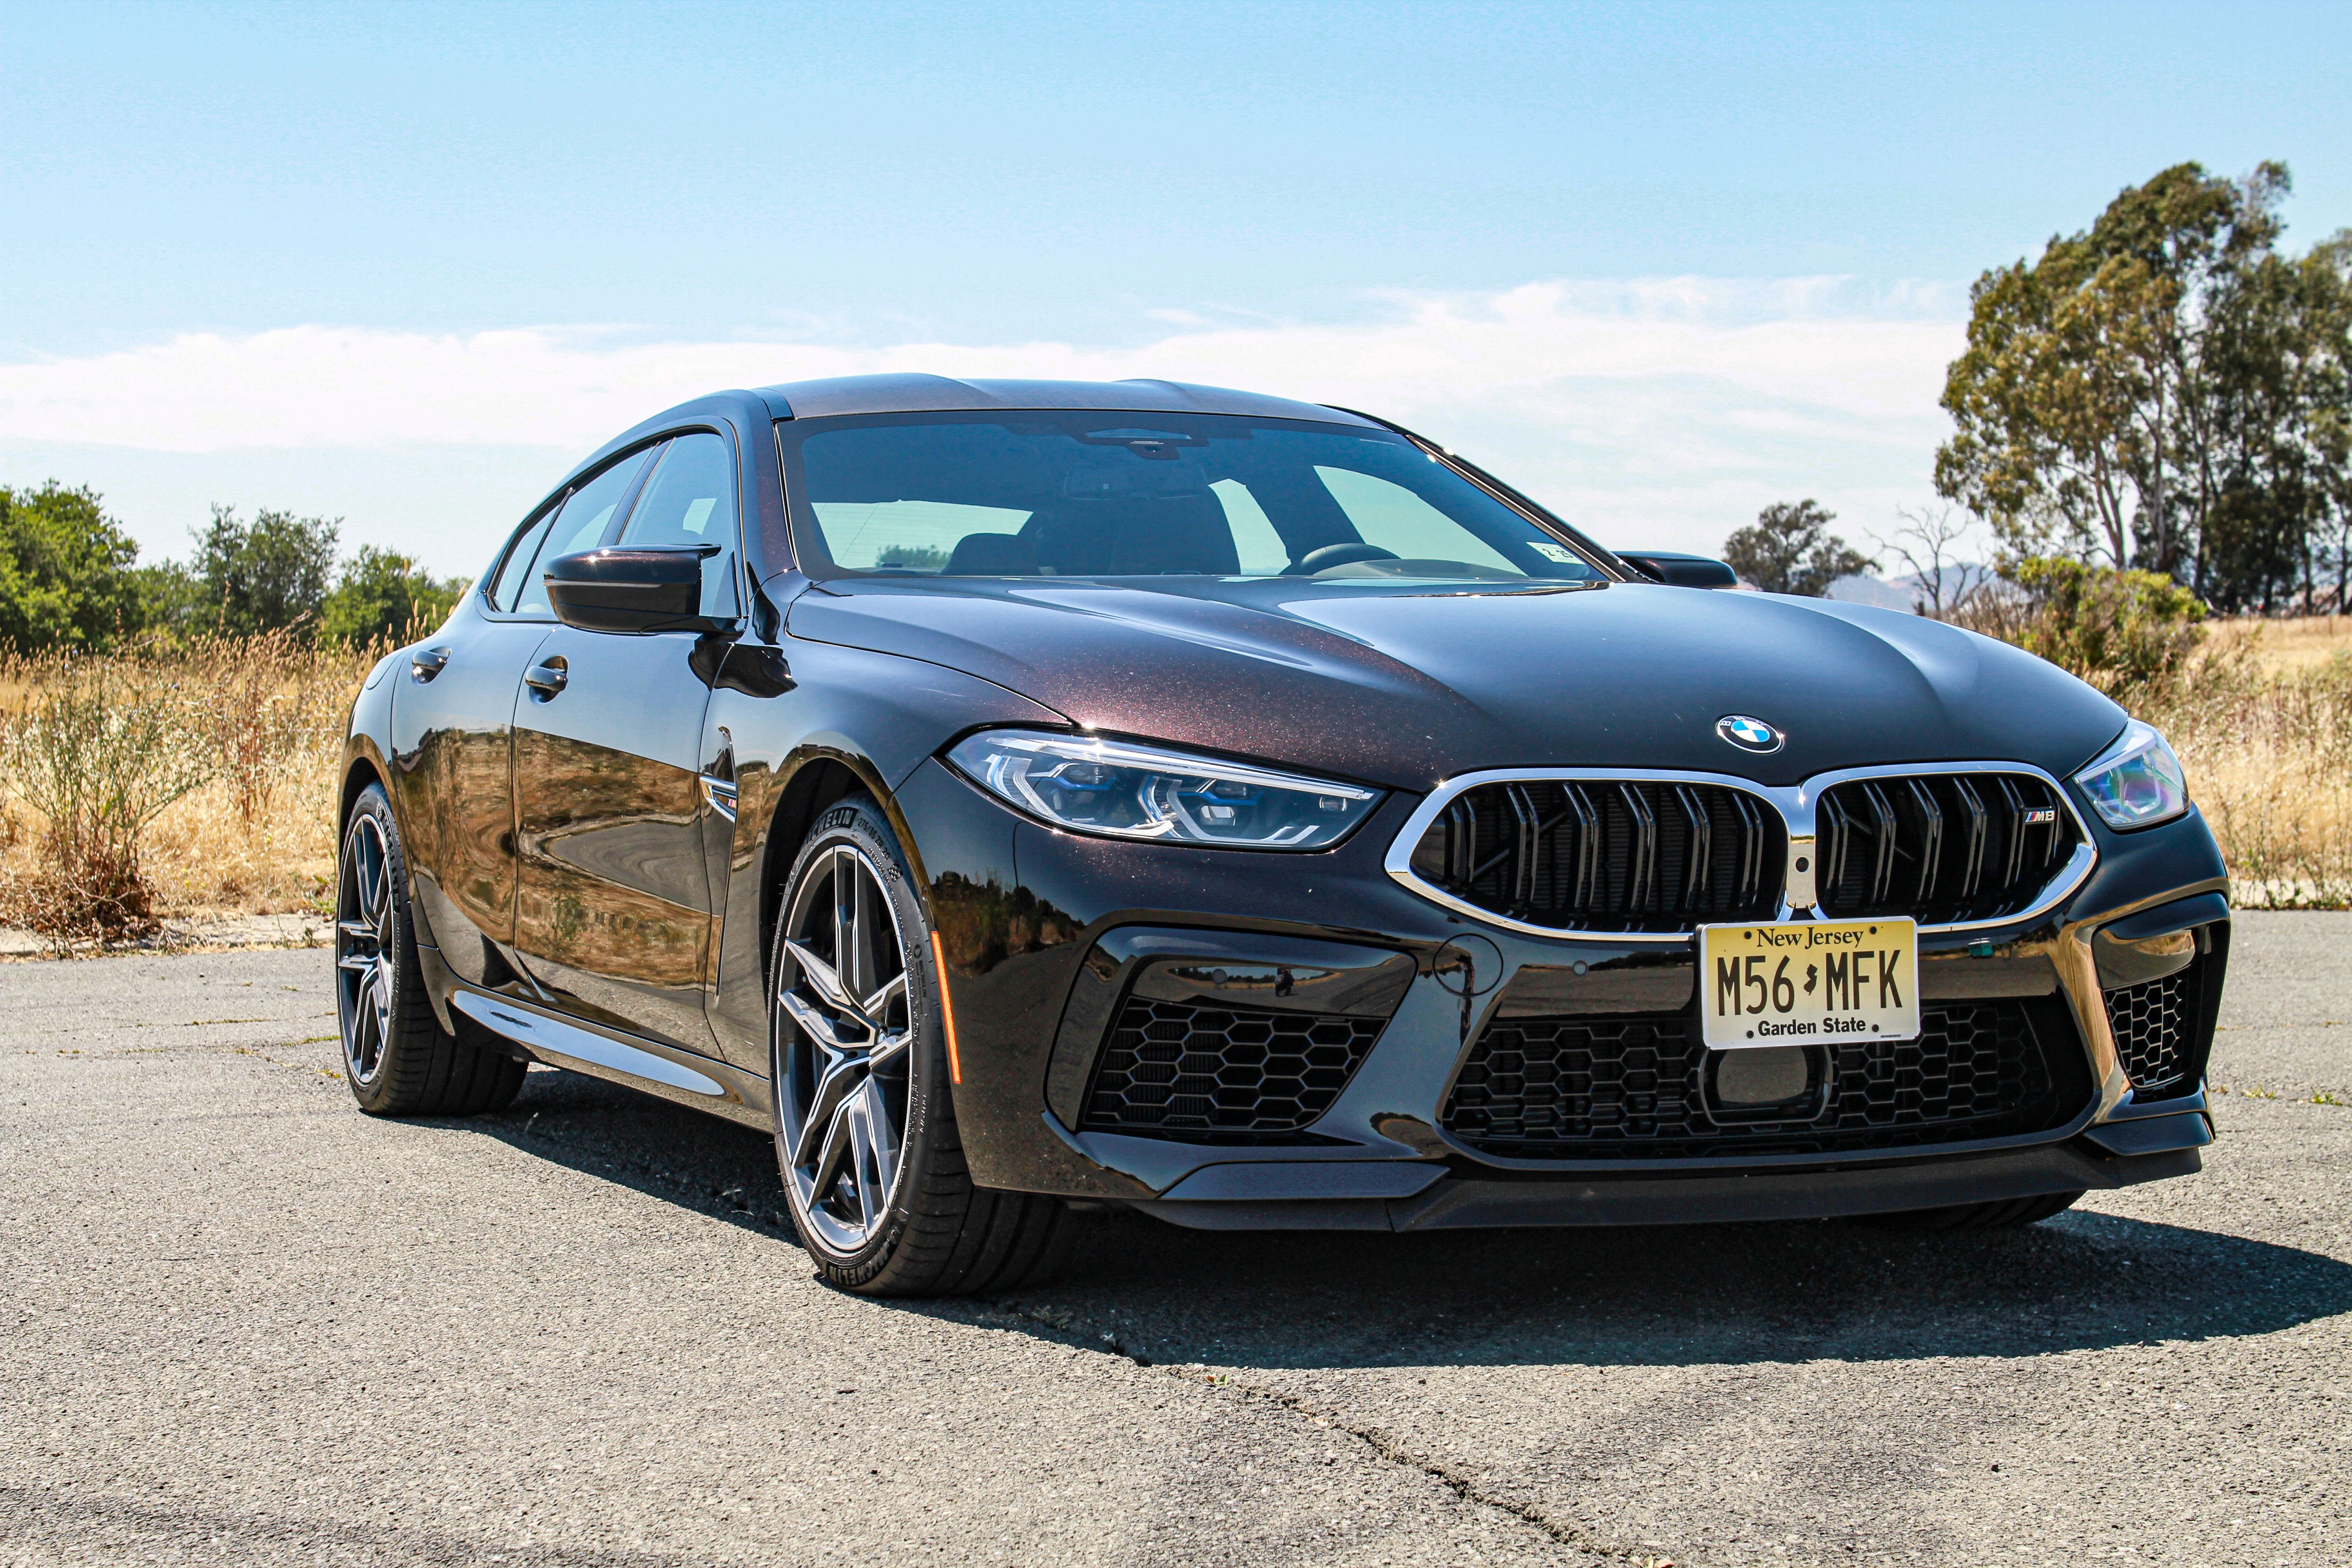 2020 BMW M8 Gran Coupe - Driving Impressions 